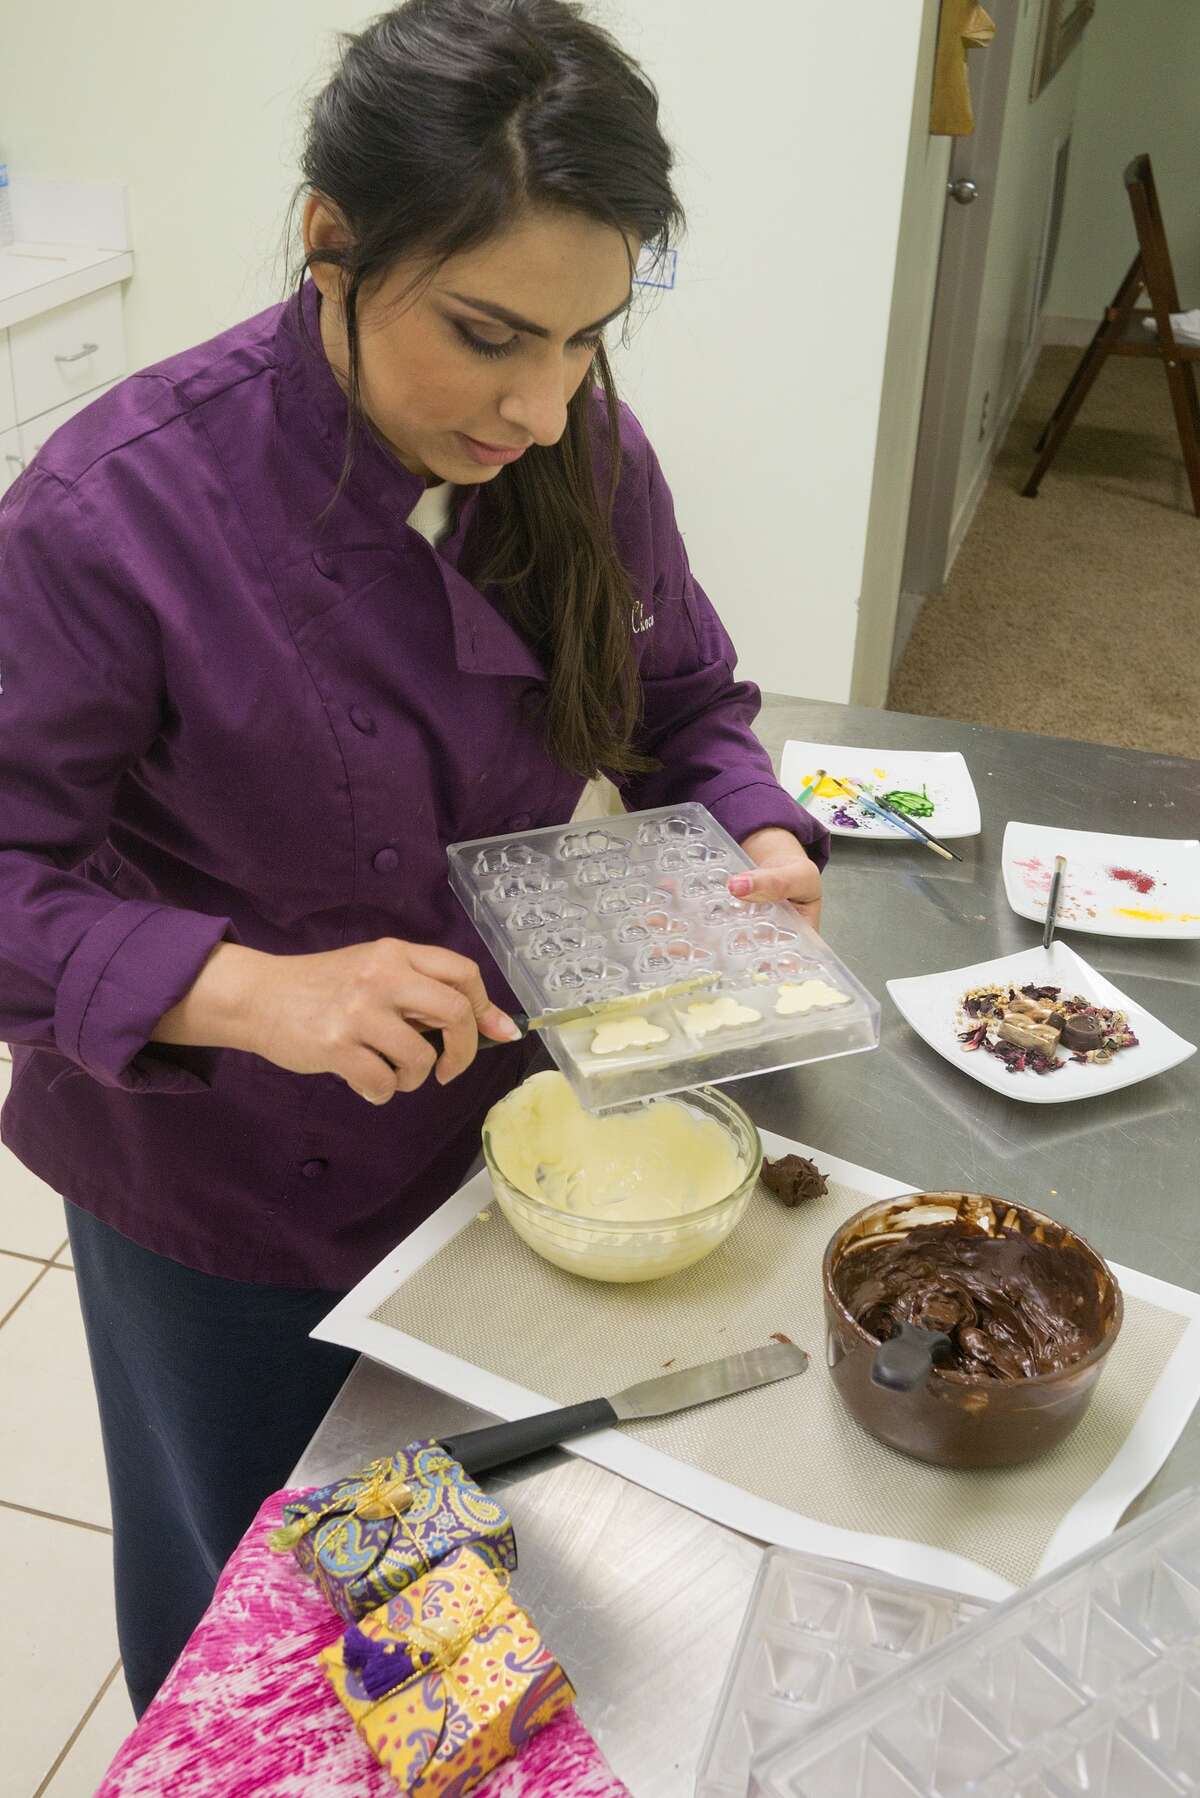 Chocolatier Sarah Ali makes hand-painted chocolates in her kitchen at the Transformation Studio in Sugar Land. Chocolatier Sarah Ali makes hand-painted chocolates in her kitchen at the Transformation Studio in Sugar Land.